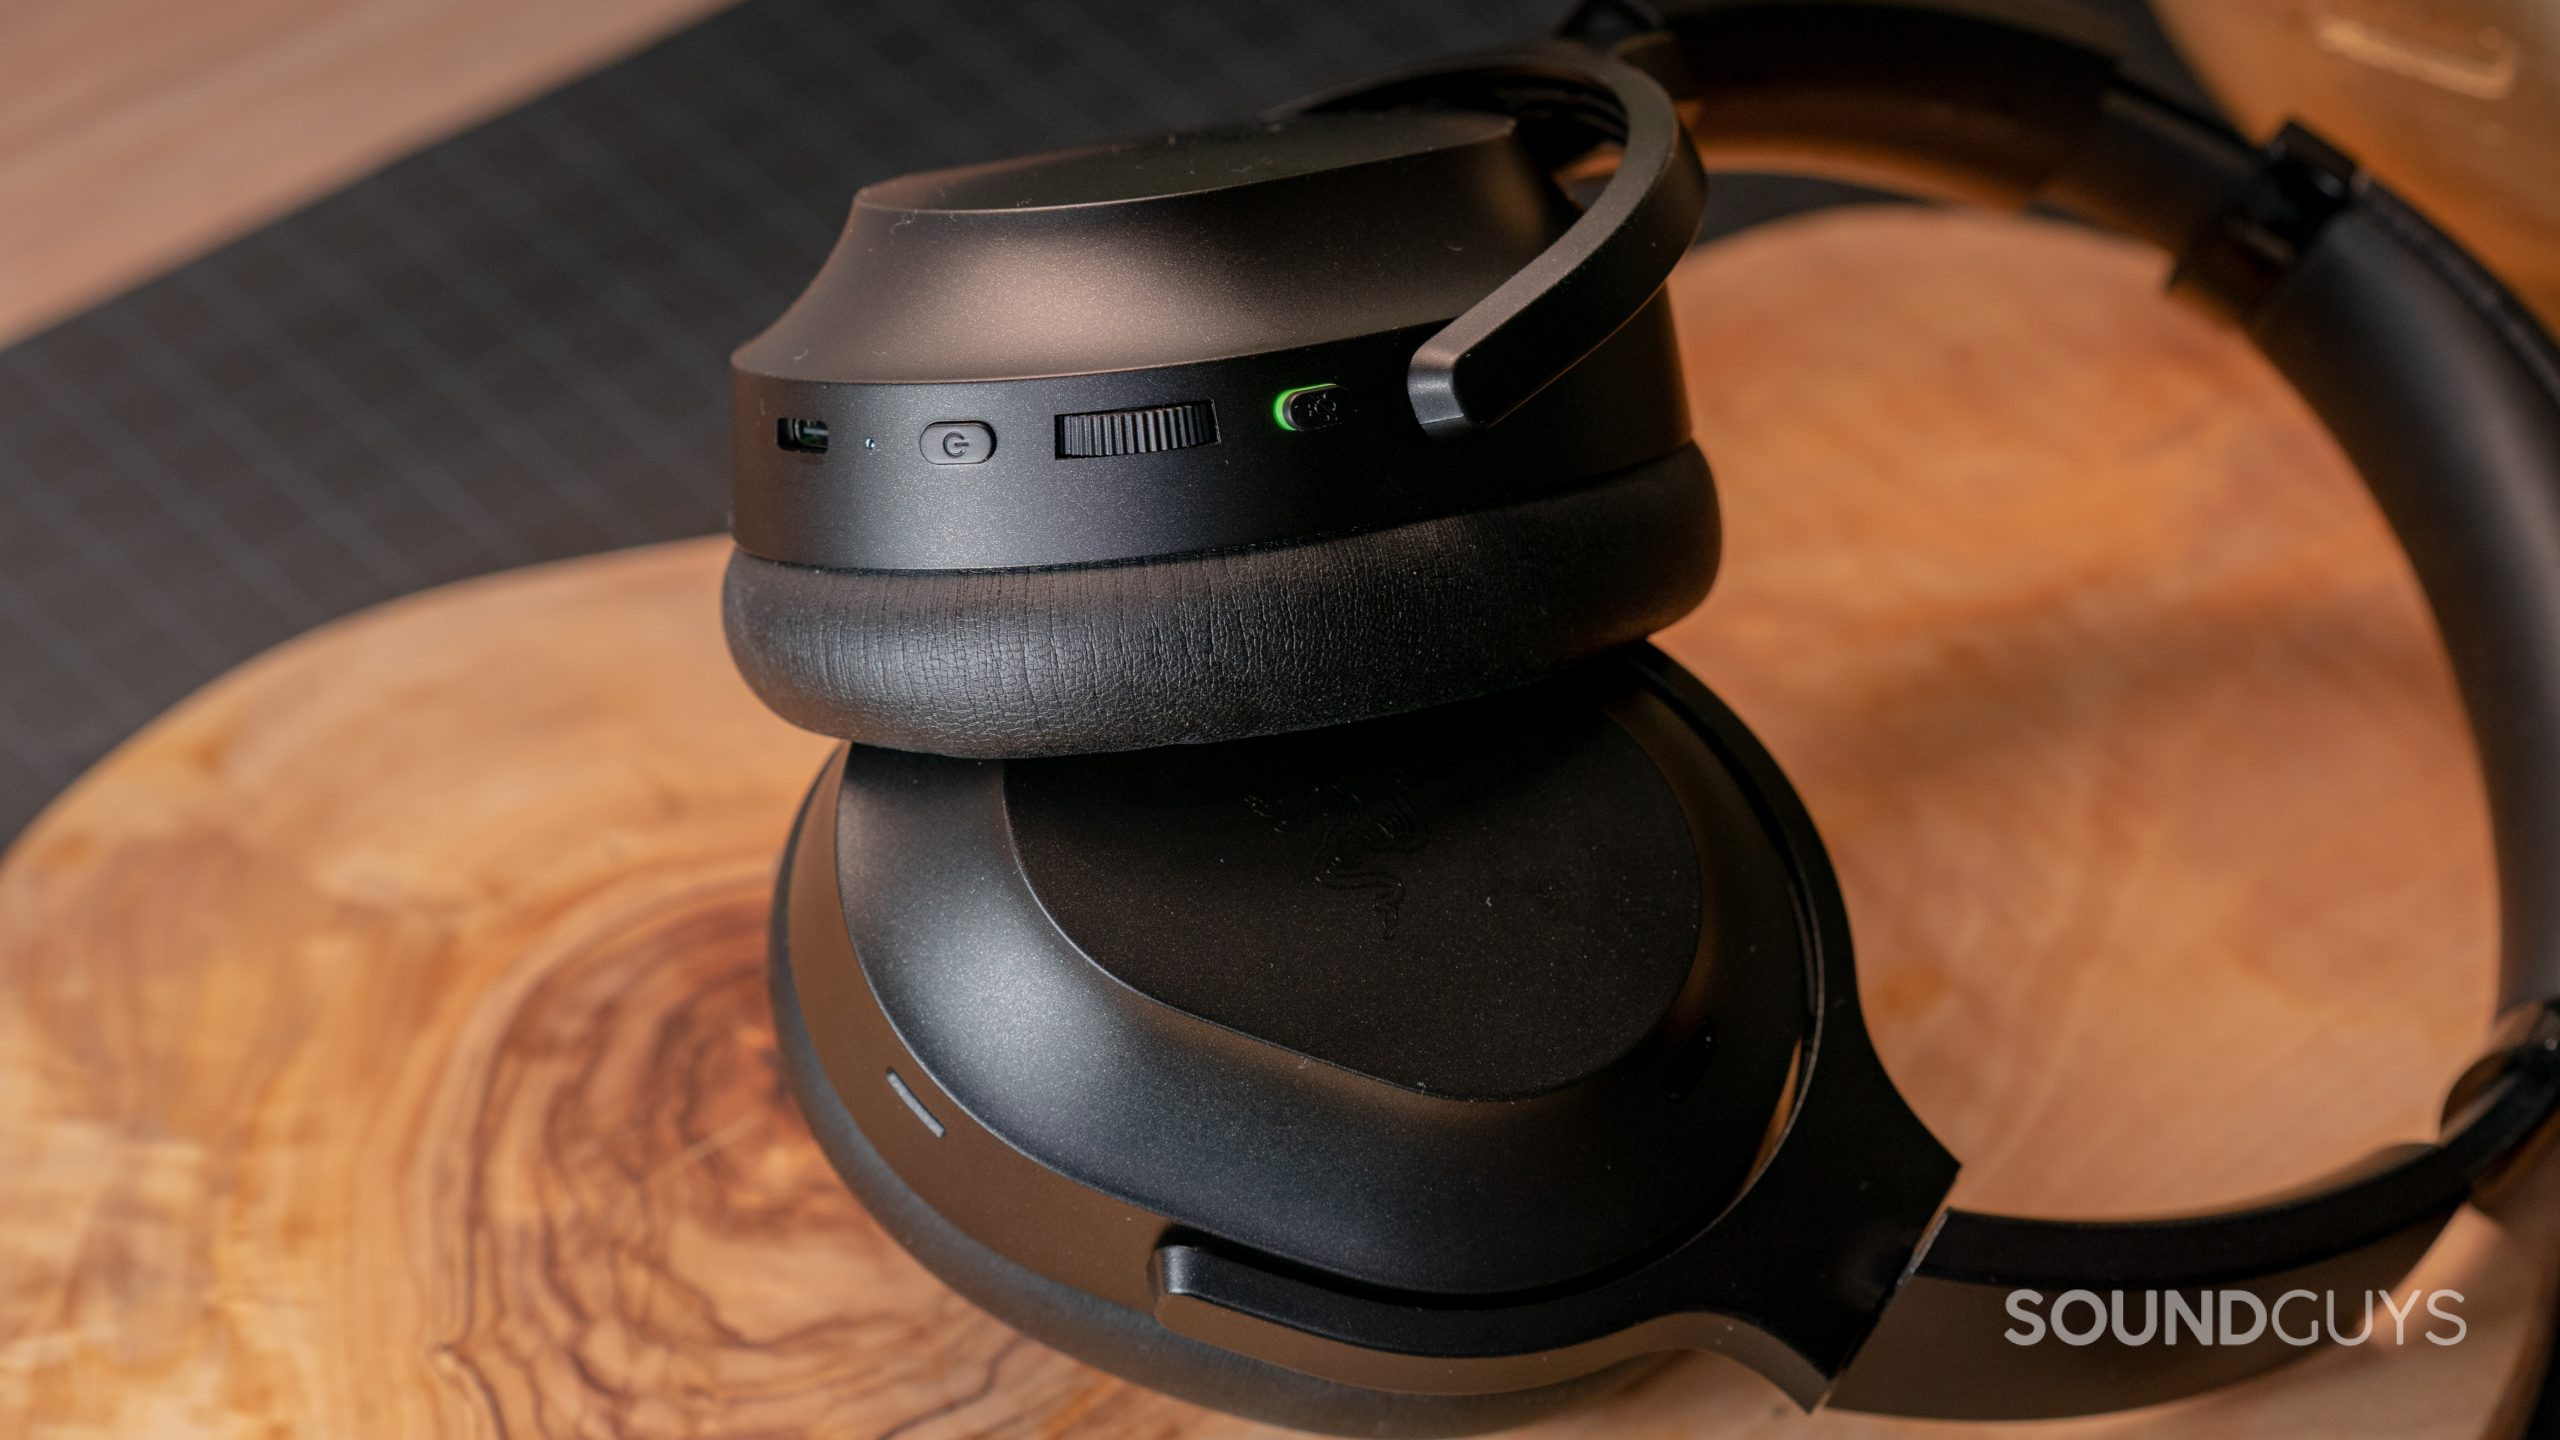 The two ear cups of the Razer Barracuda Pro next to each other, showing their controls.